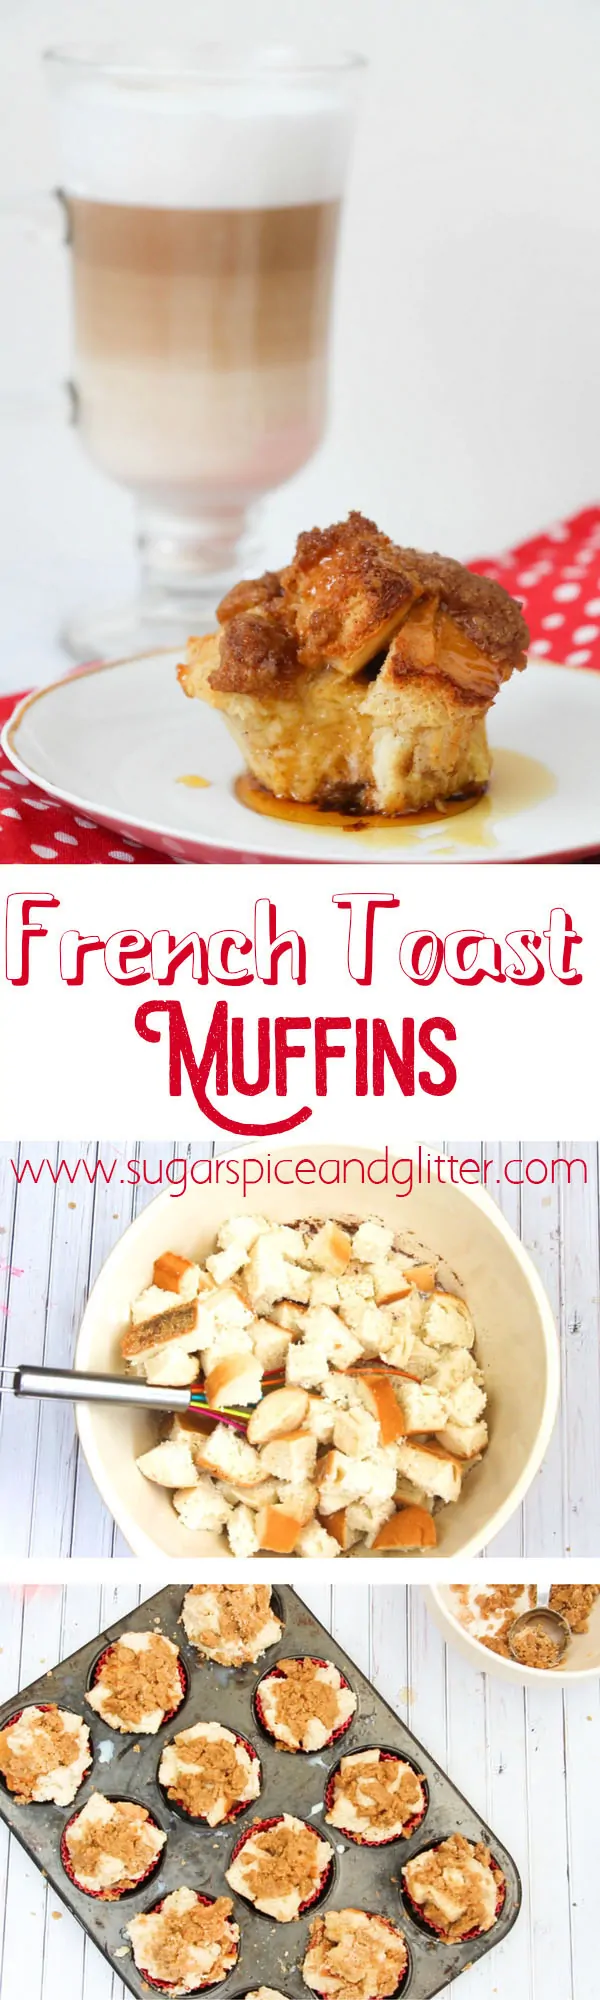 Super easy to make and absolutely delicious, these French Toast Muffins are a grab-and-go version of the brunch classic, so you can enjoy French Toast even in the middle of the week! Topped with a crunchy crumb topping, these French Toast Muffins are a delicious treat your whole family will love